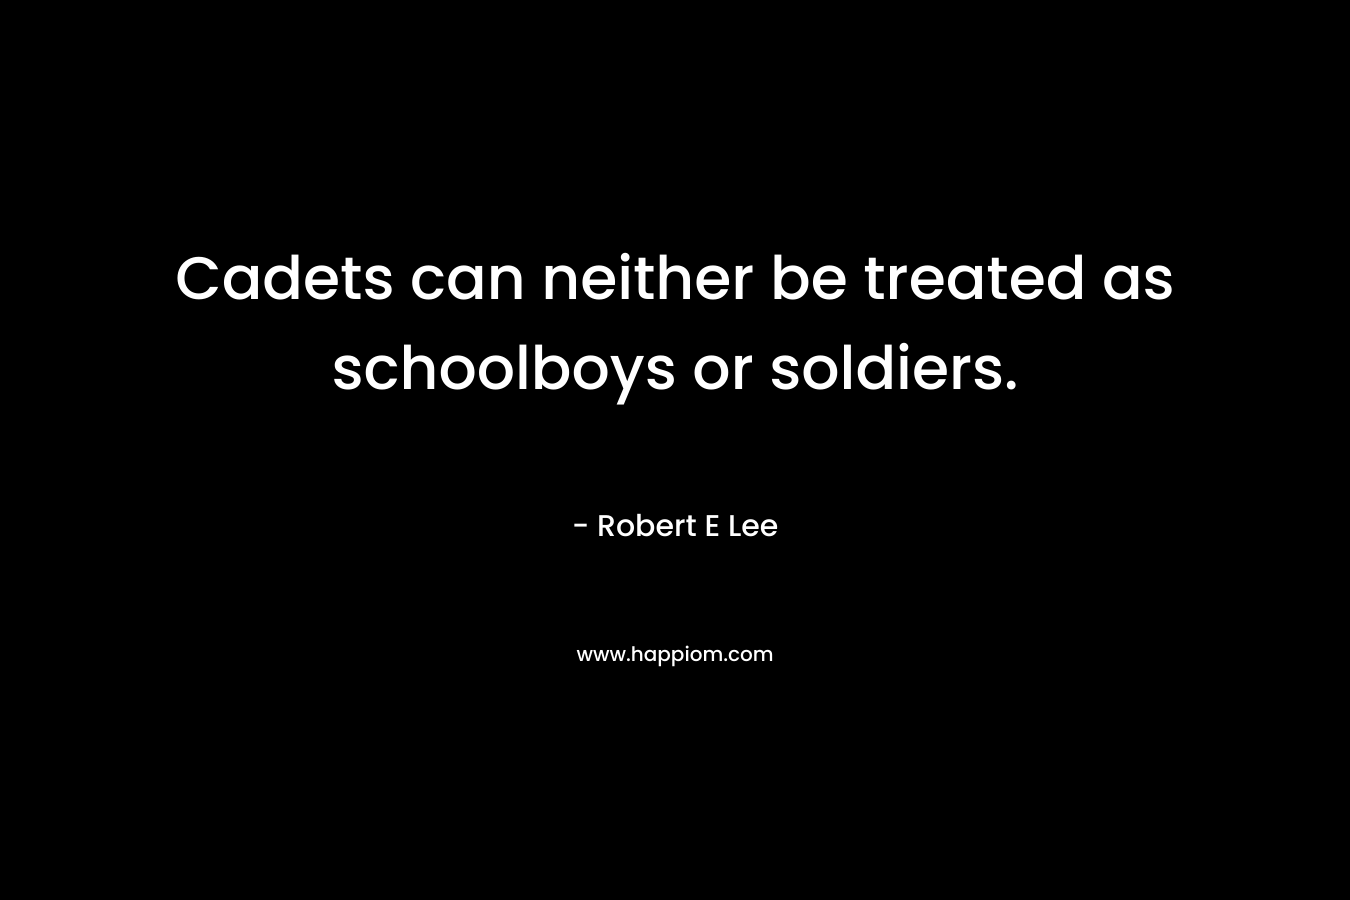 Cadets can neither be treated as schoolboys or soldiers. – Robert E Lee